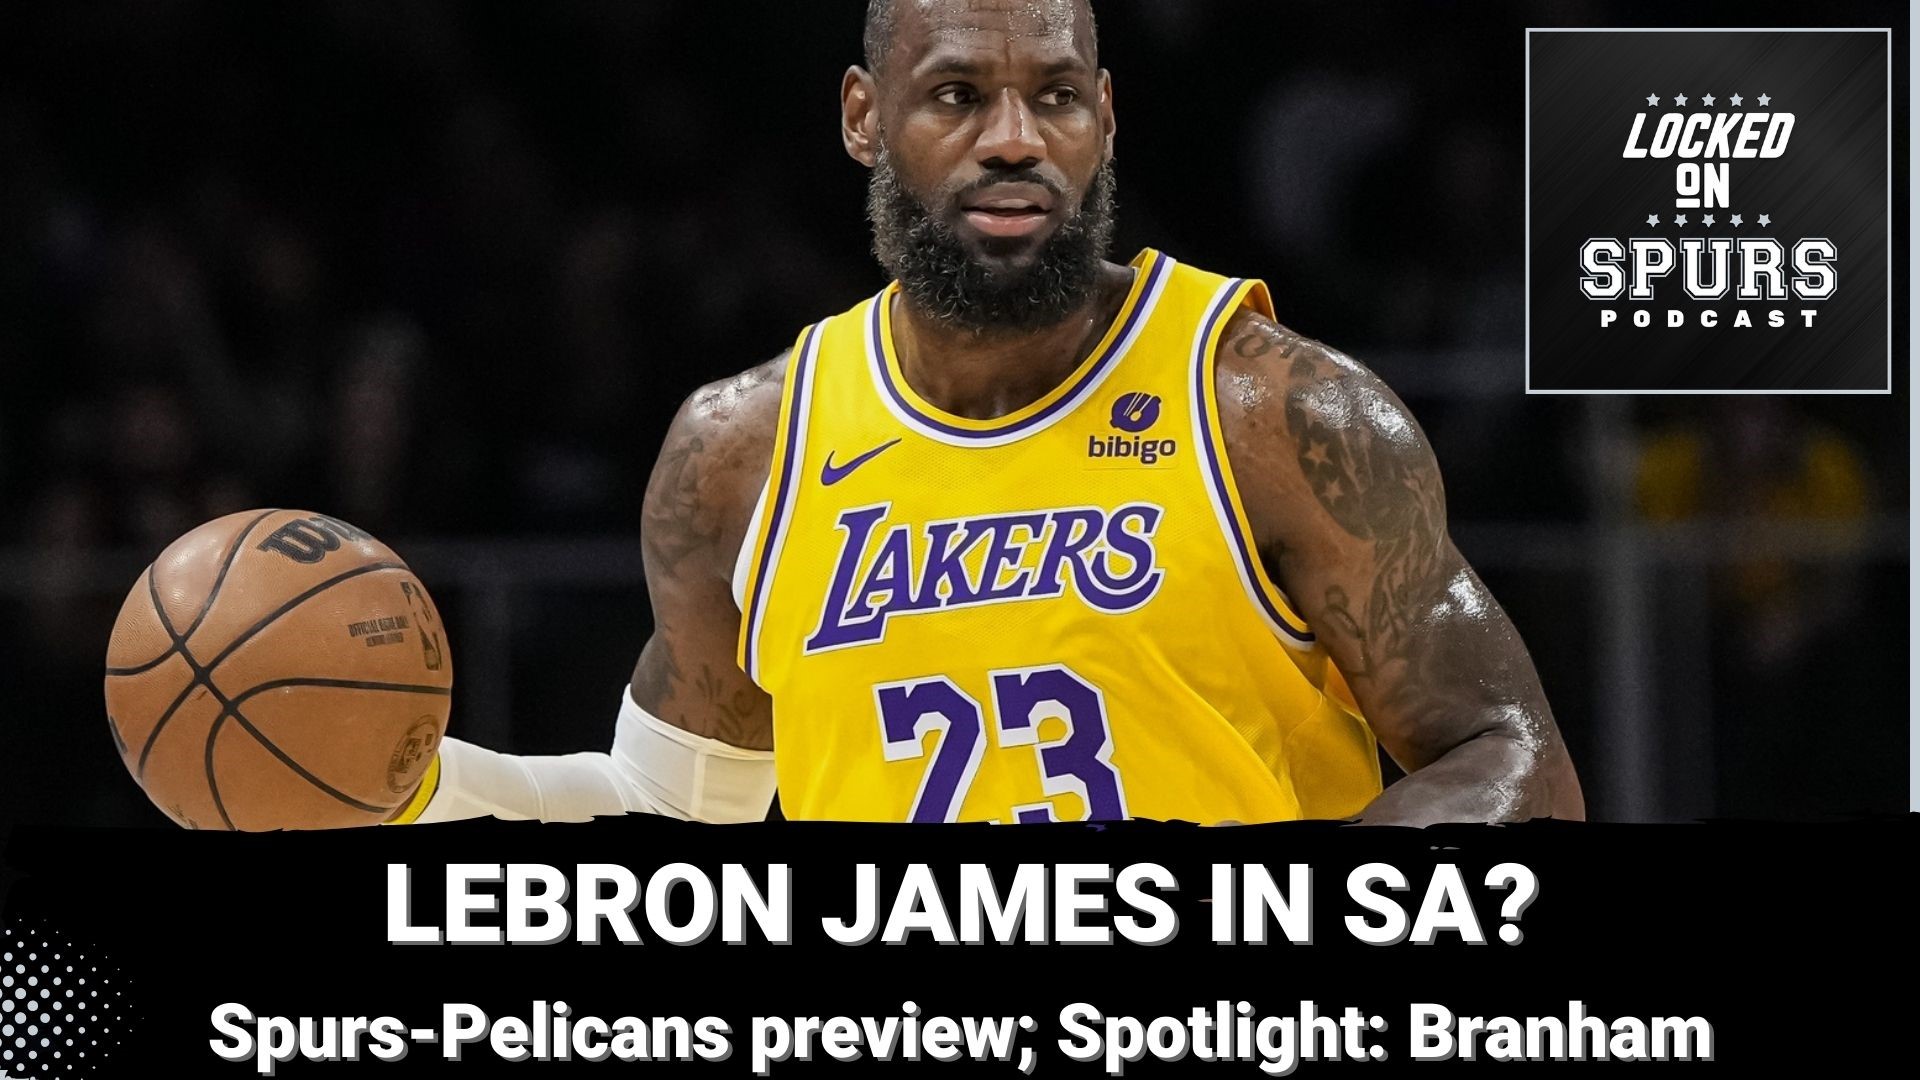 Also, Spurs-Pelicans preview and Malaki Branham in the spotlight.